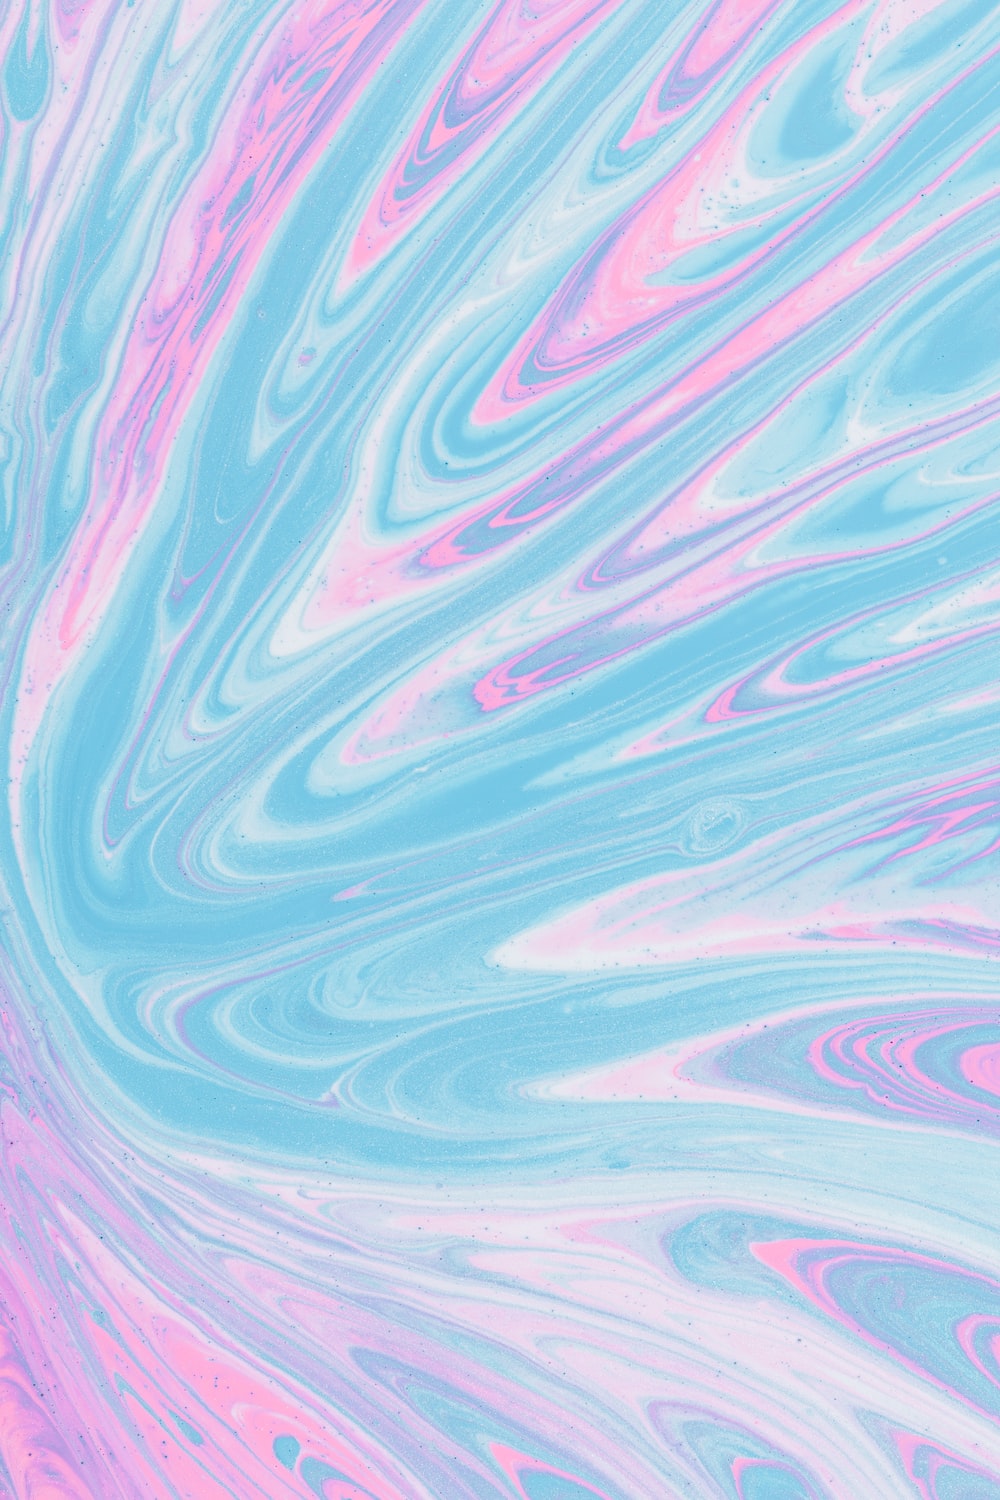 Paint Swirl Picture. Download Free Image